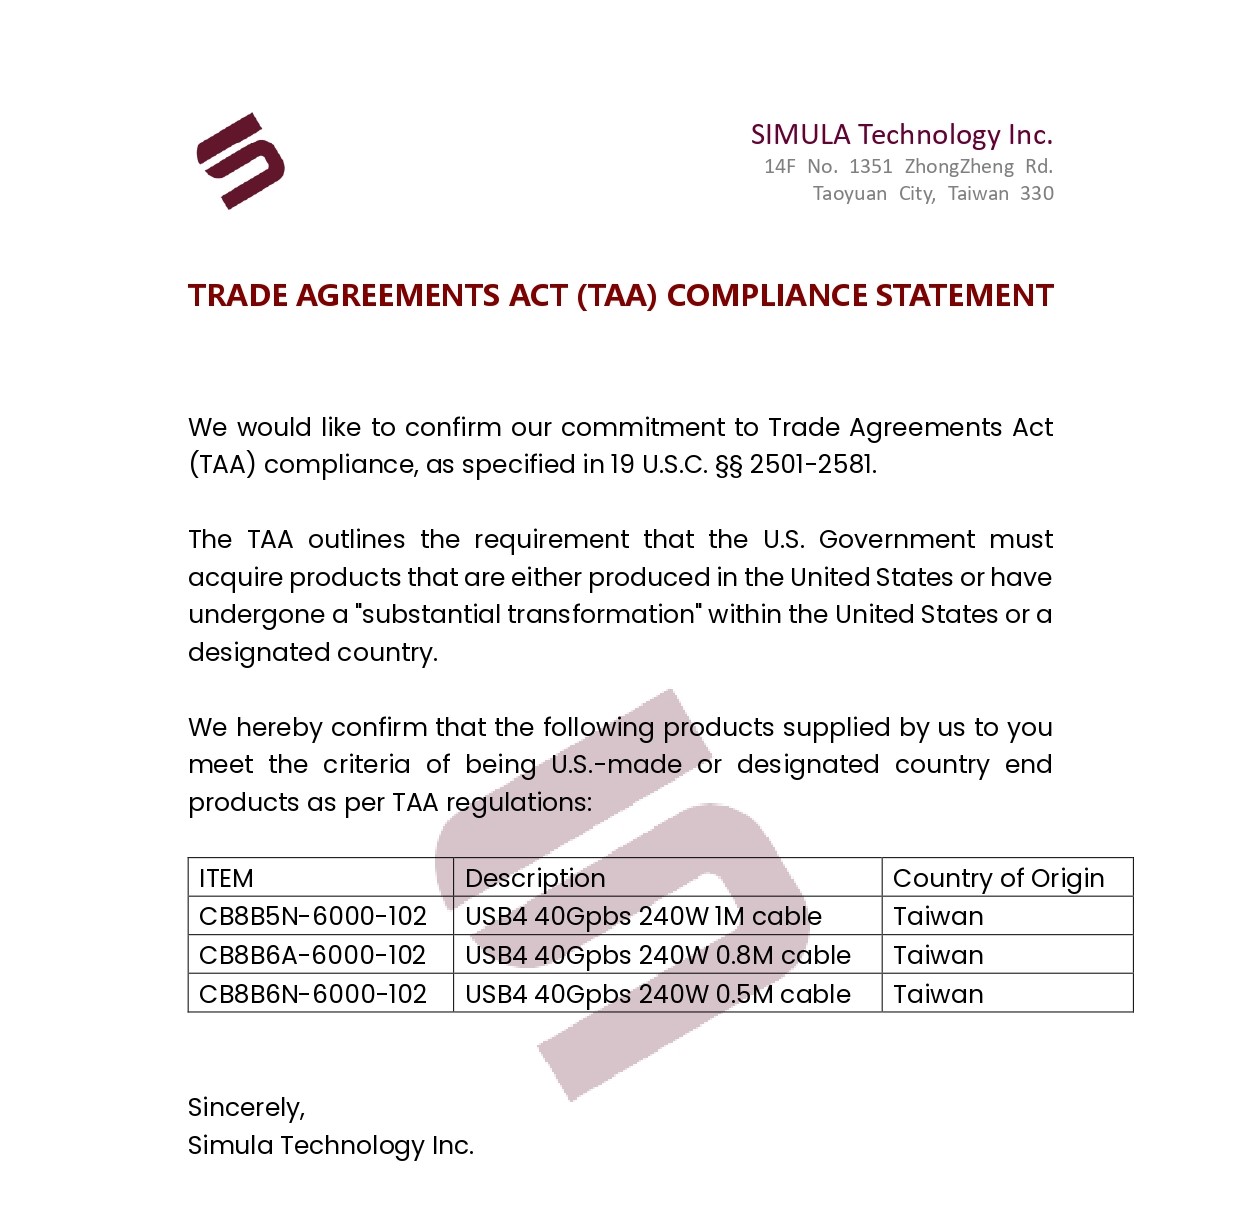 TRADE AGREEMENTS ACT (TAA) COMPLIANCE STATEMENT